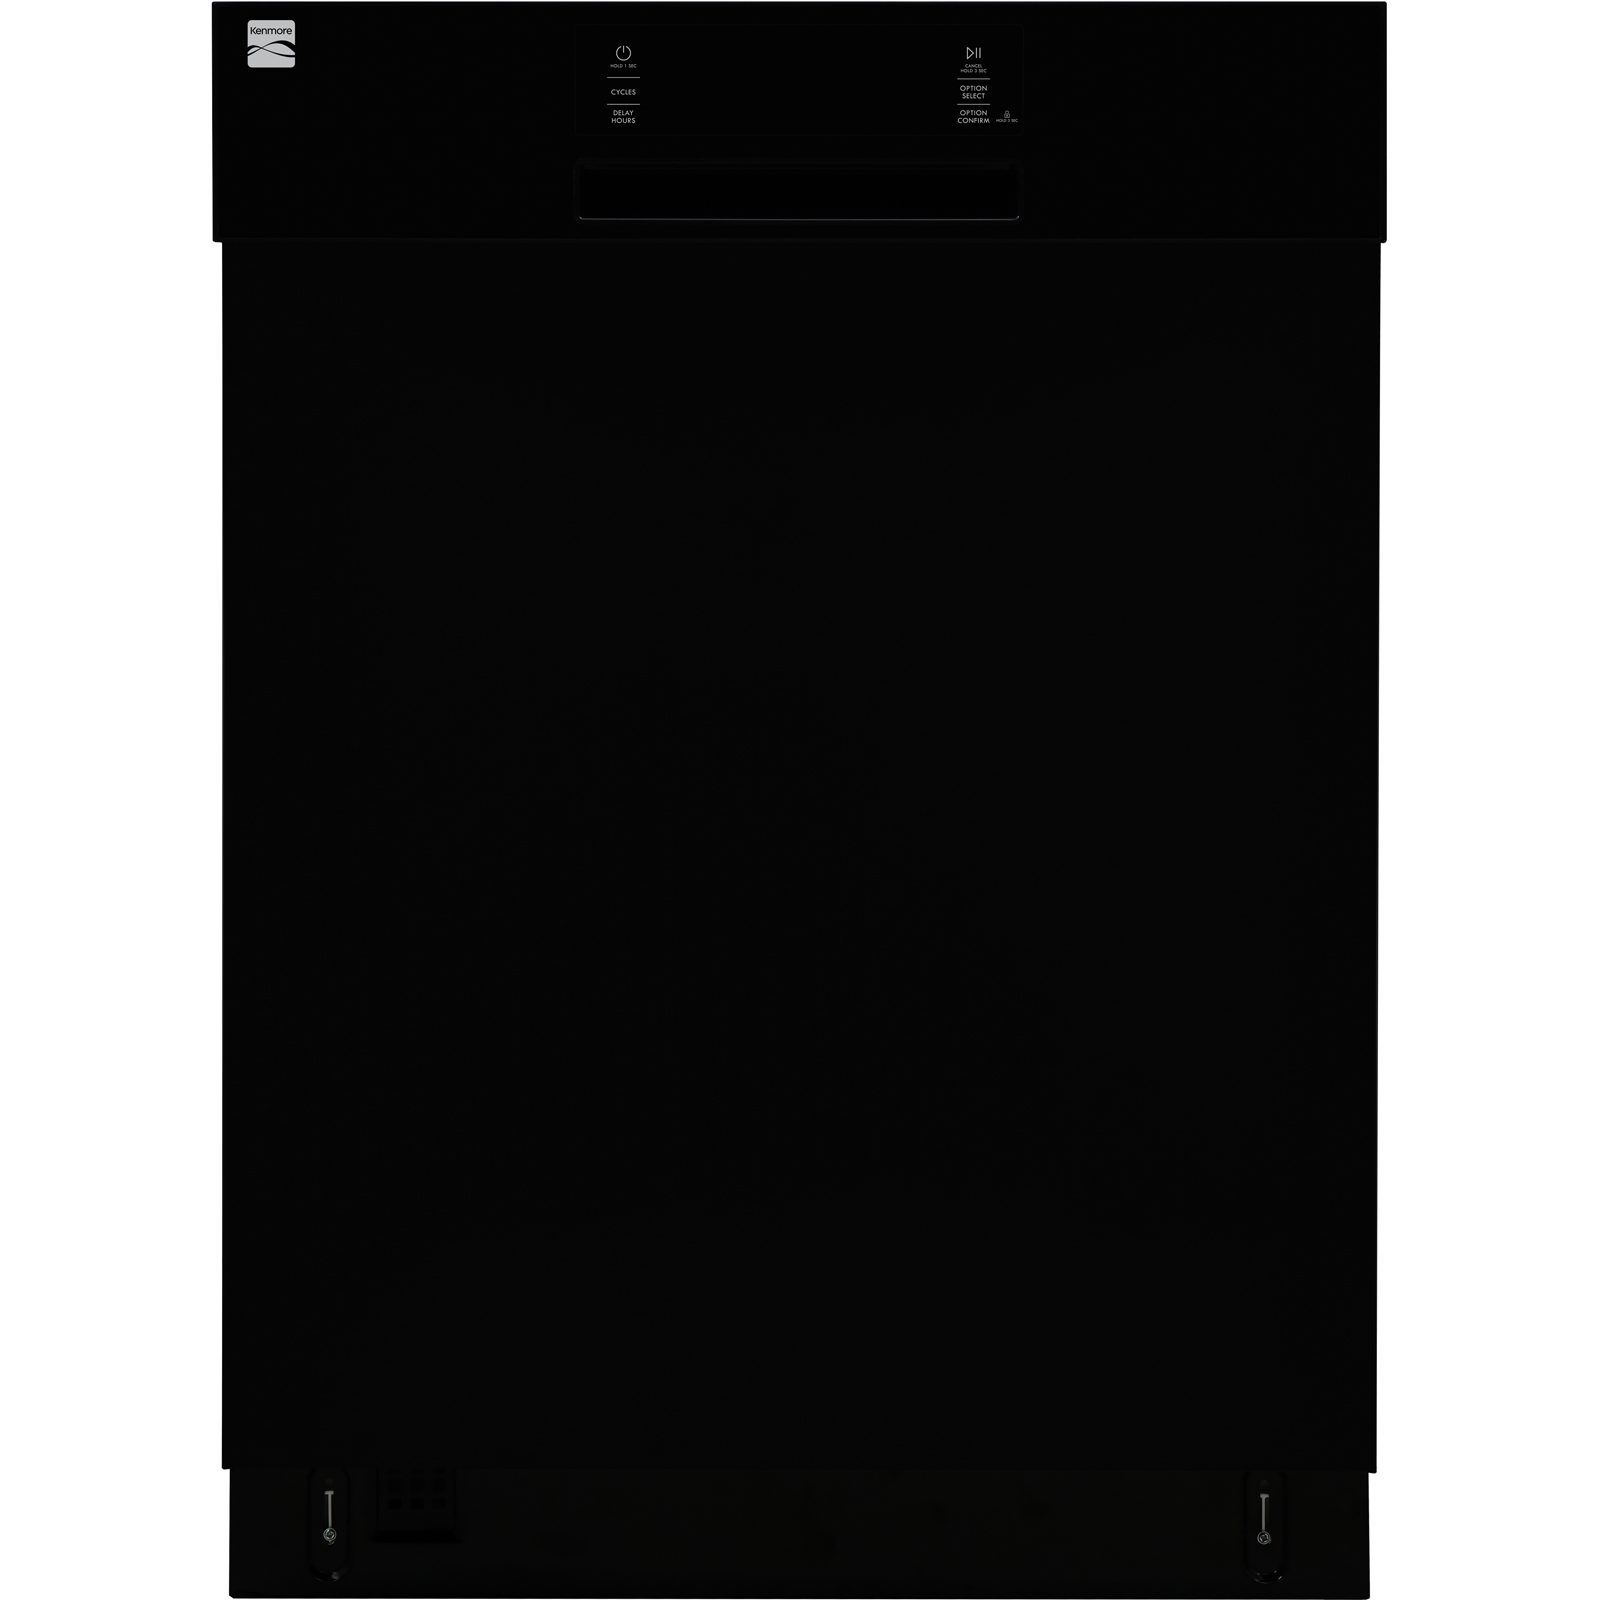 Kenmore 22-14589 14589 24" Built-in Dishwasher with UltraWash&#174; System and SmartWash&#174; &#8211; Black